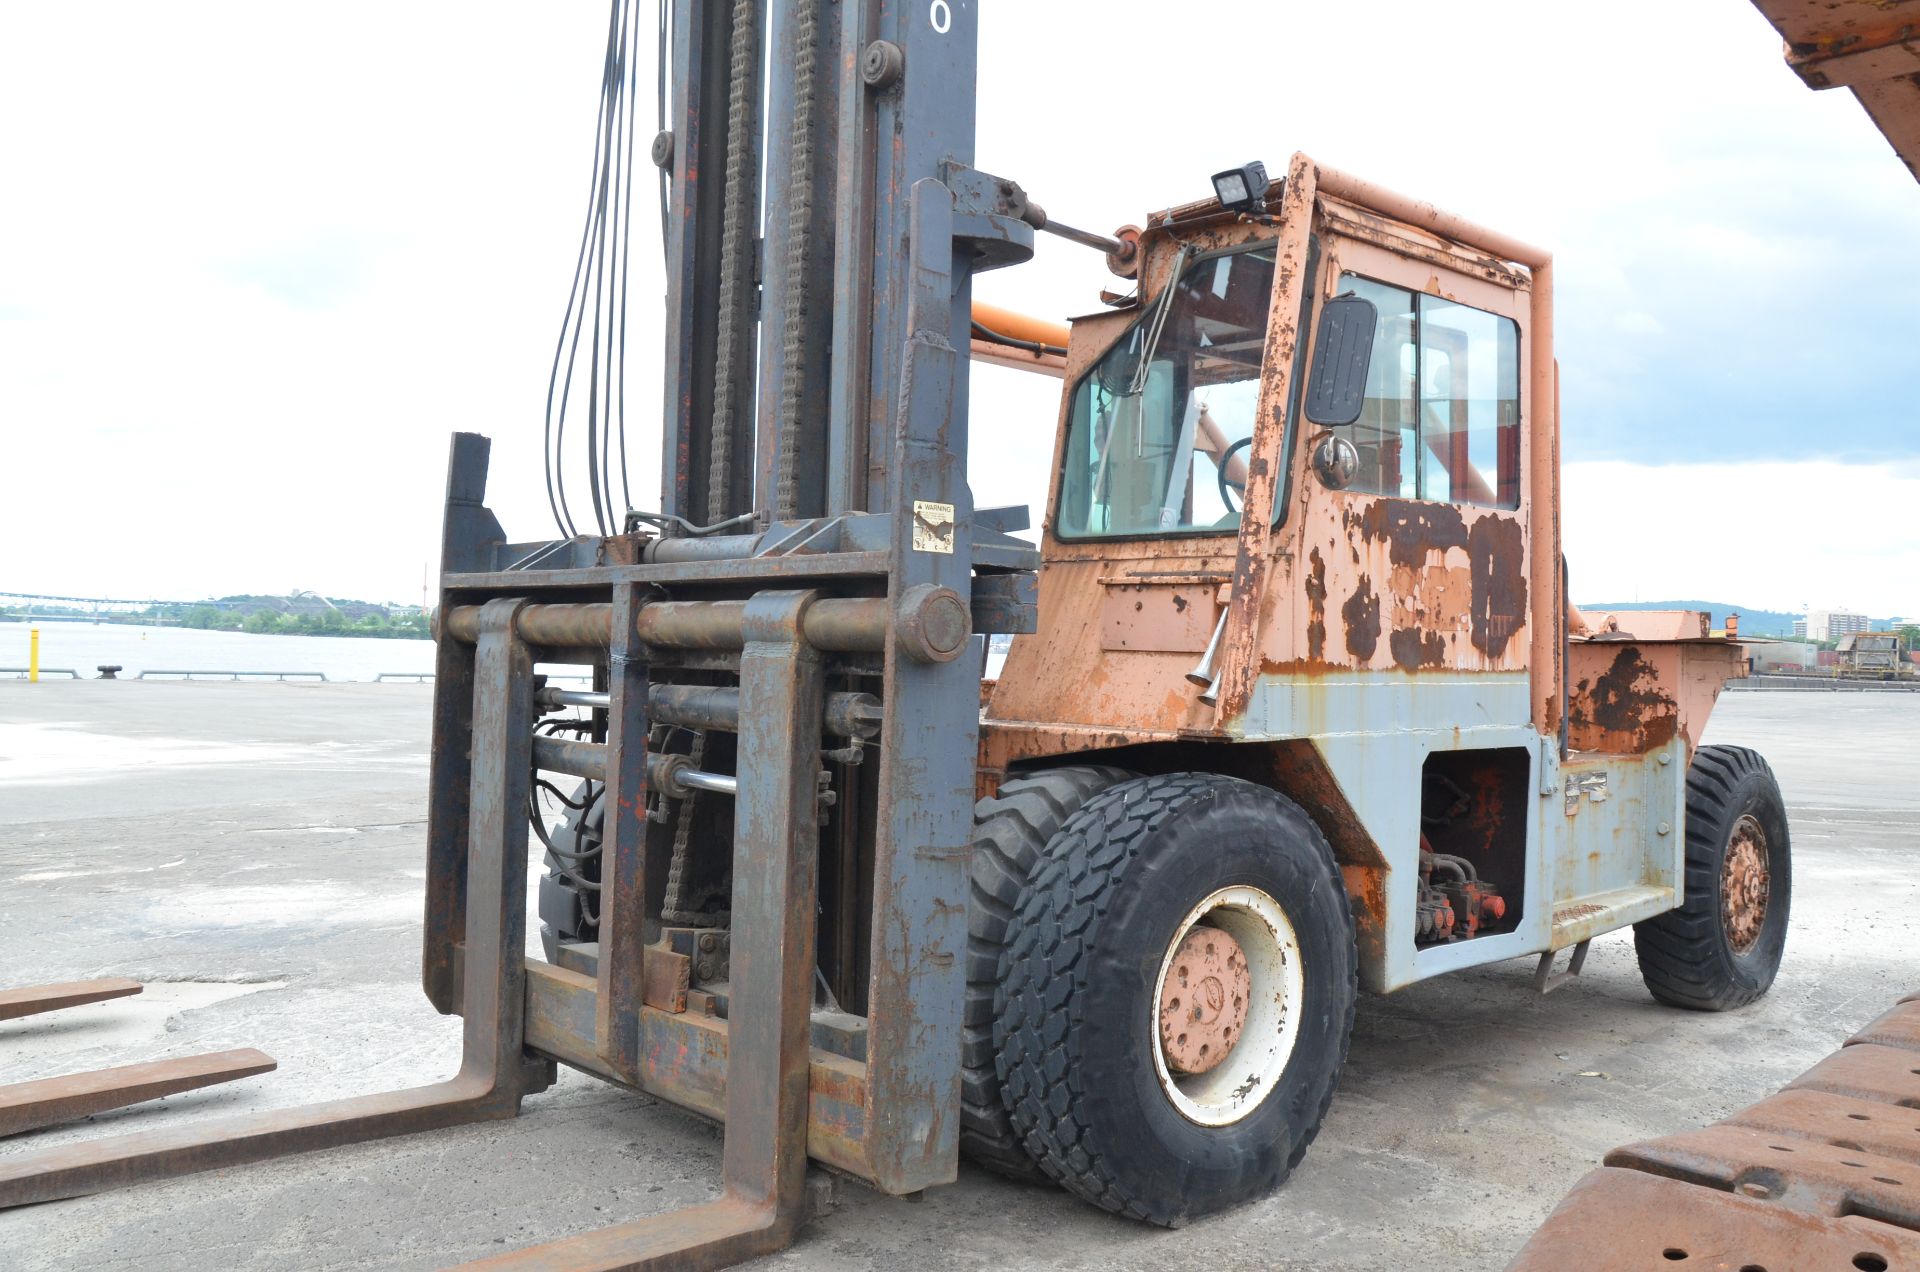 TAYLOR Y62 WOM HEAVY DUTY OUTDOOR DIESEL FORKLIFT WITH 62,000 LBS. CAPACITY - Image 3 of 21